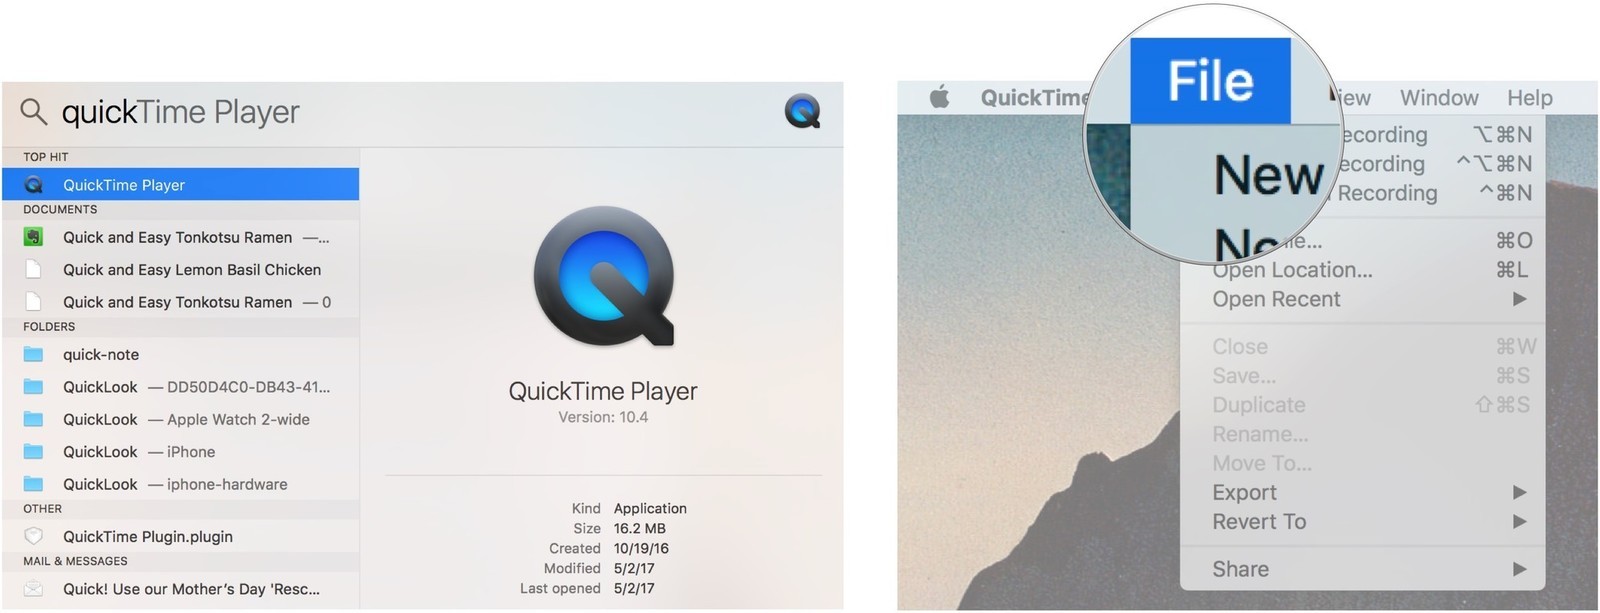 quicktime for mac 2017